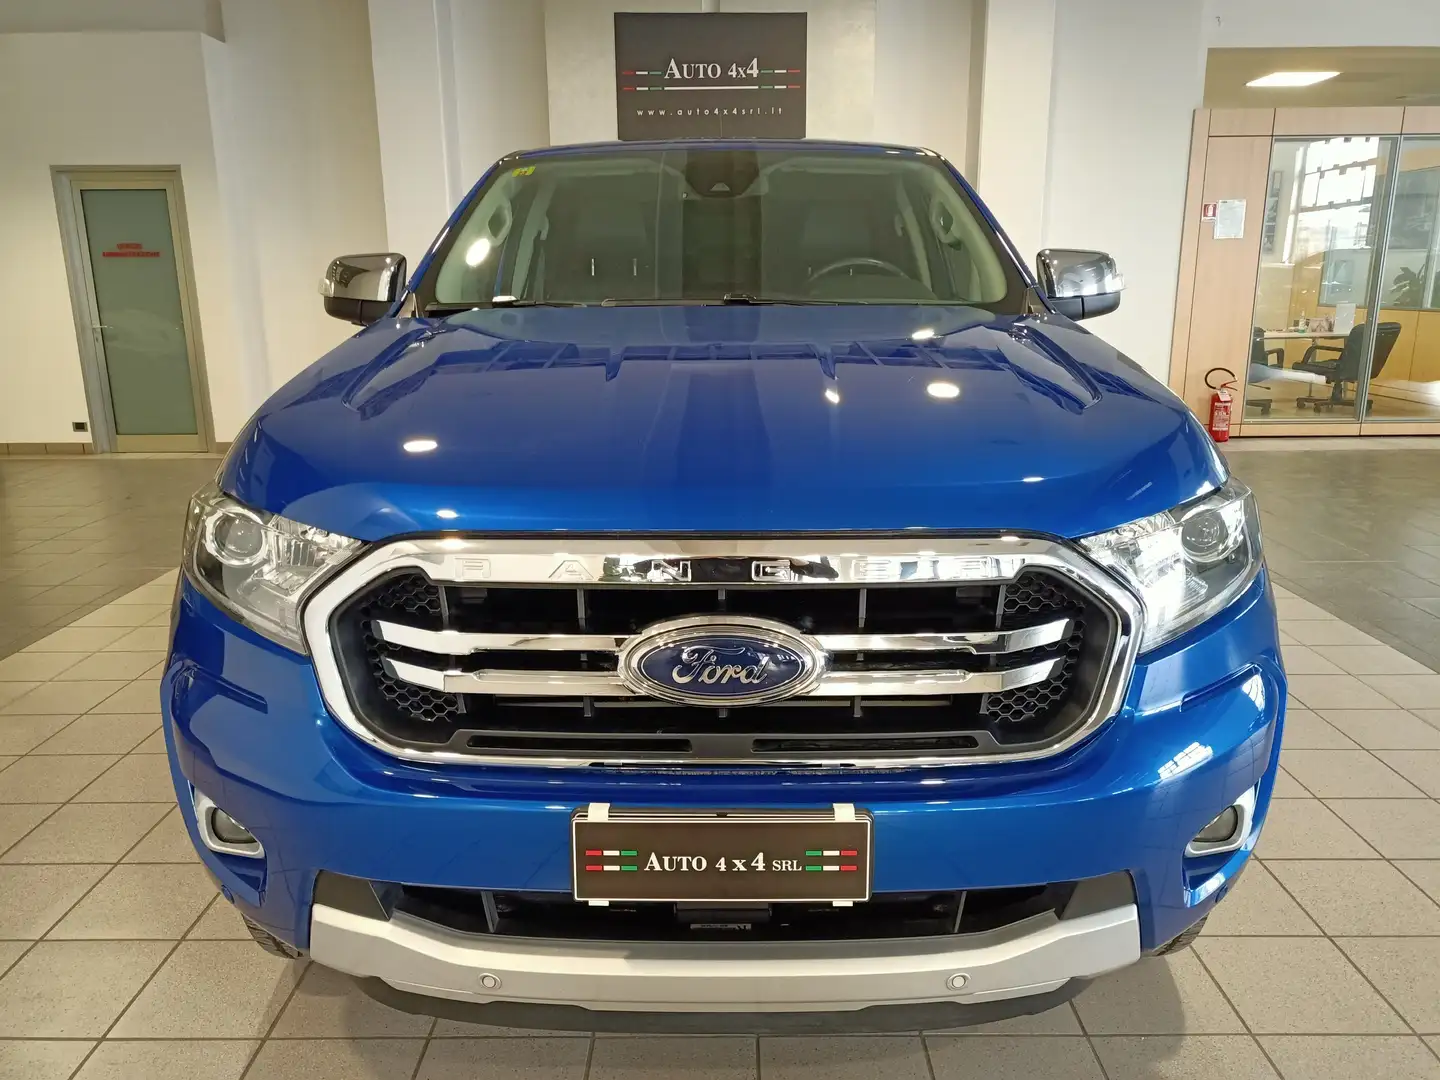 Ford Ranger Ranger 2.0 tdci double cab Limited 213cv auto* Blauw - 2